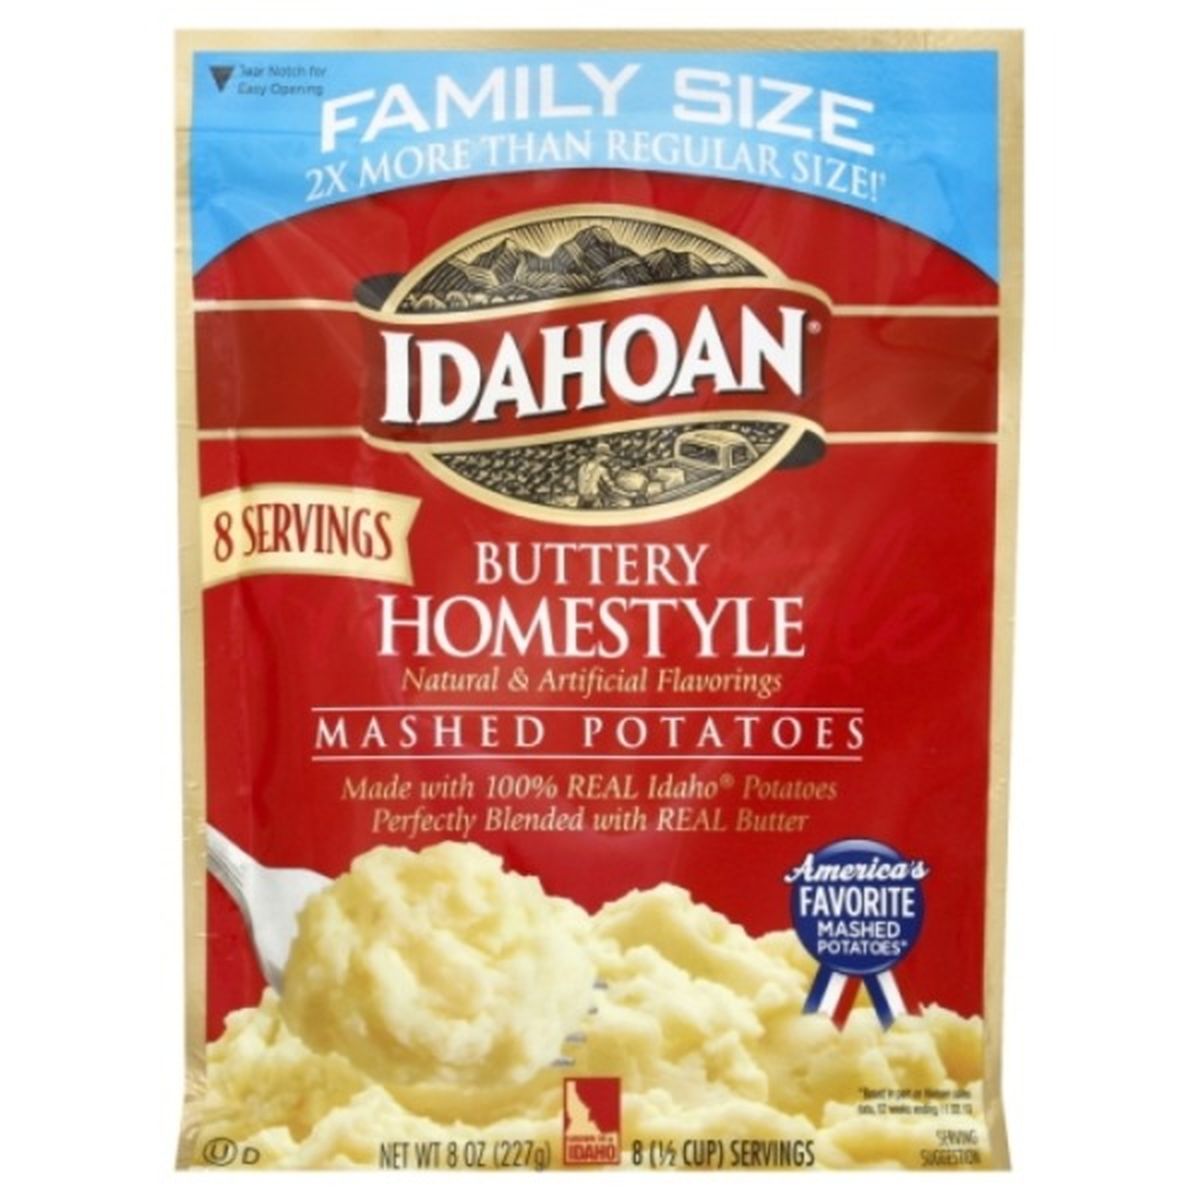 Calories in Idahoan Mashed Potatoes, Buttery Homestyle, Family Size